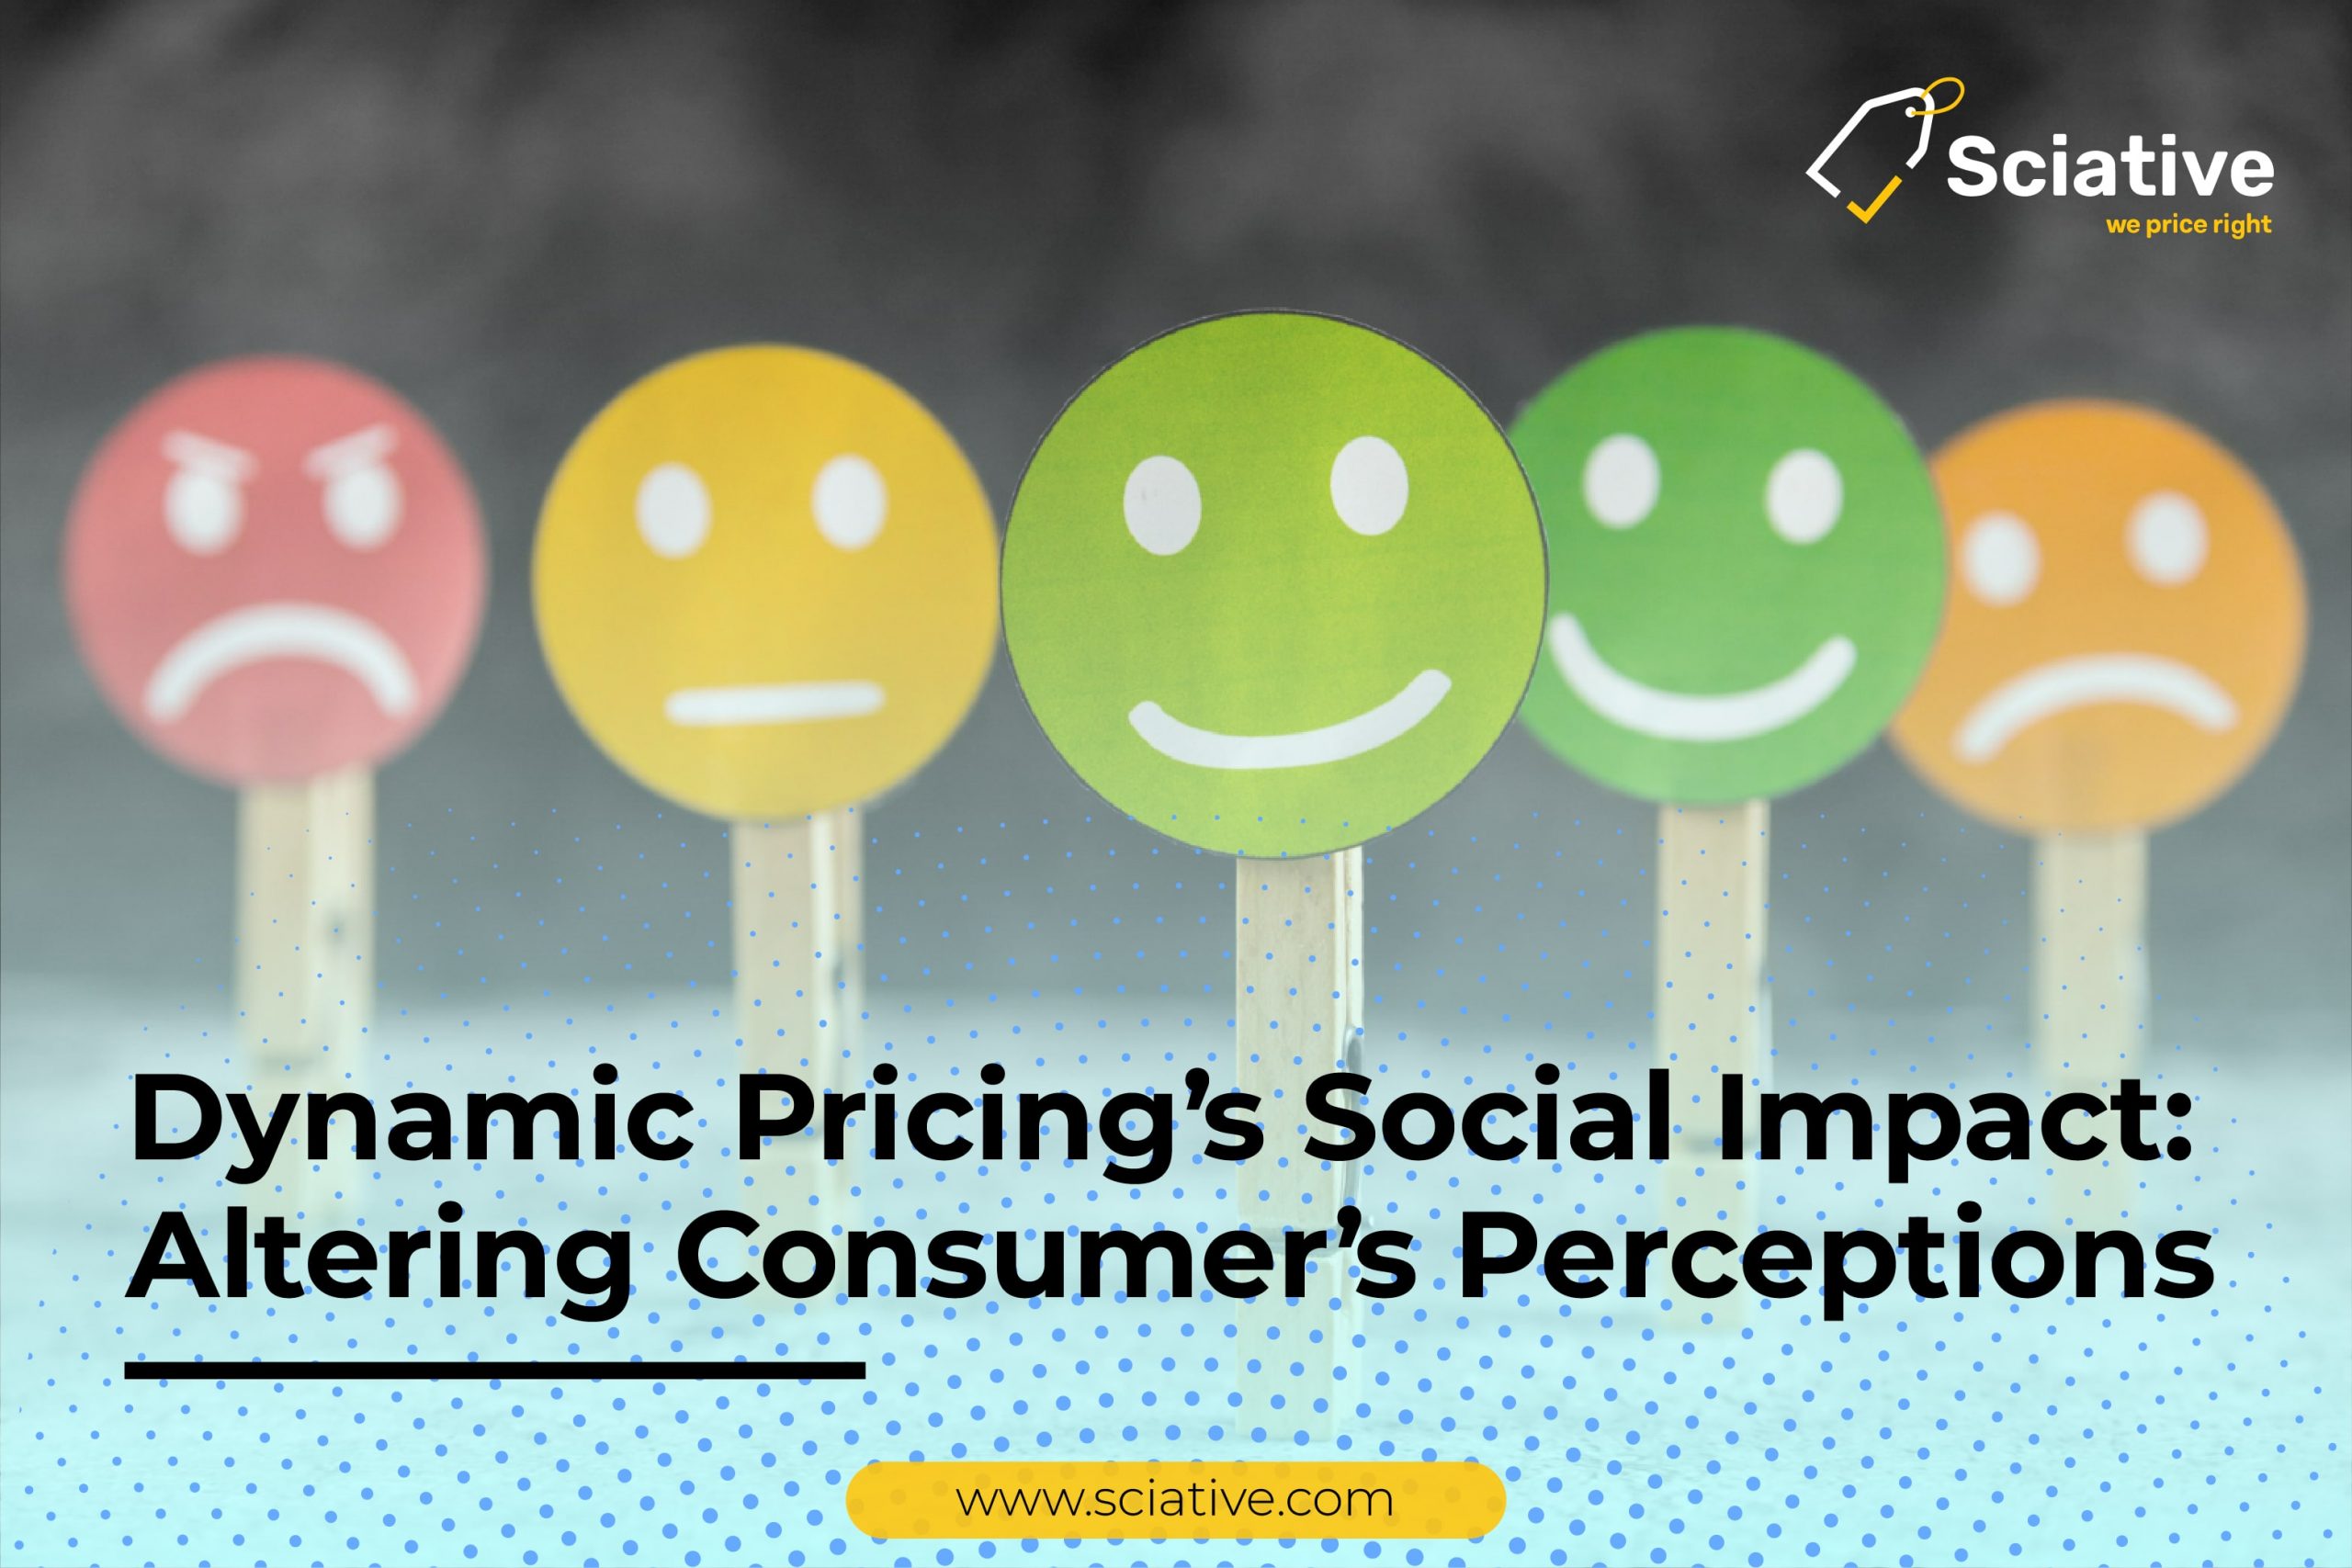 Social Impact of Dynamic Pricing: Altering Consumer’s Perceptions